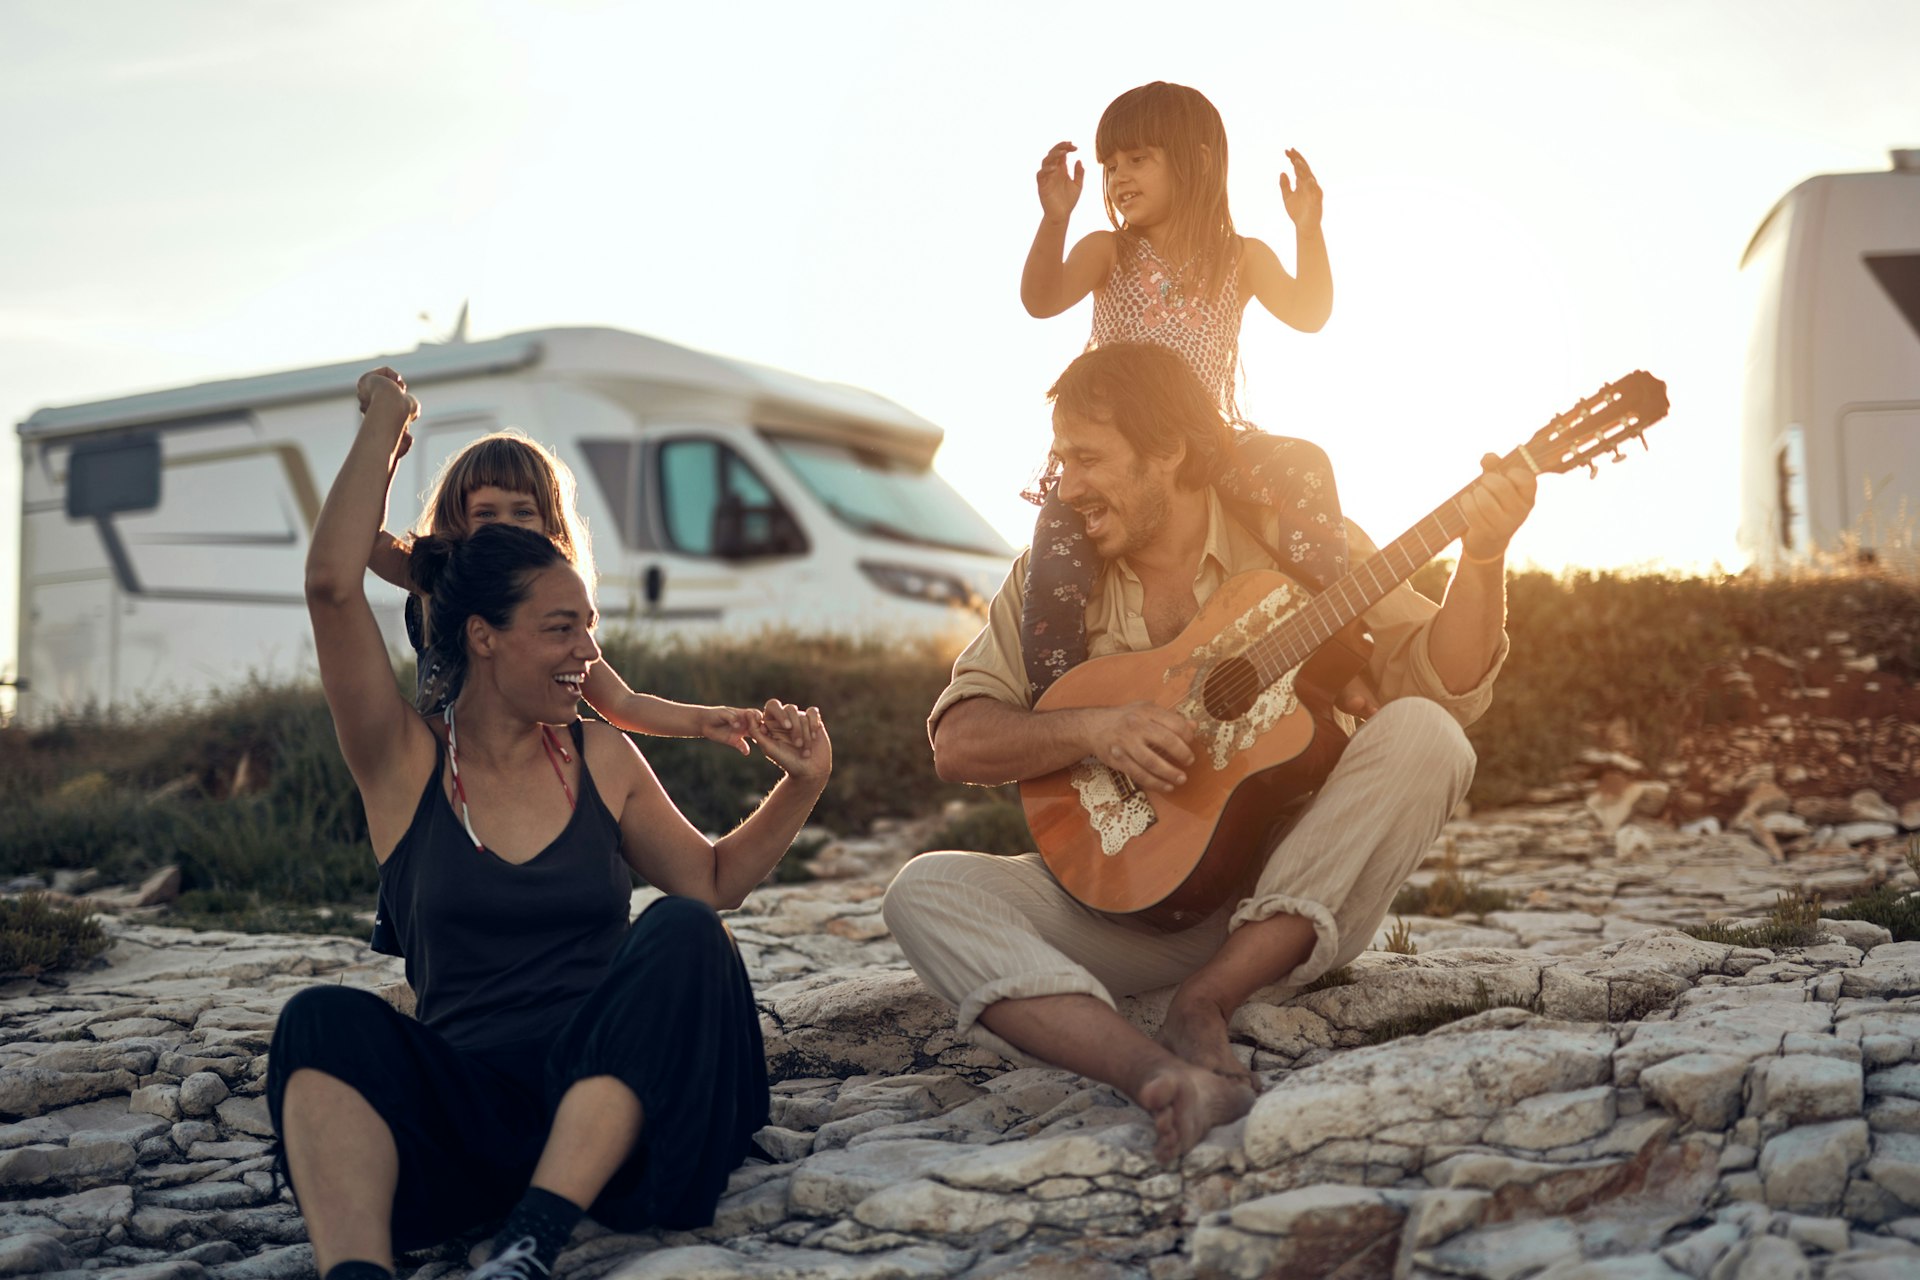 A family singing together on a beach in Croatia with their camper van parked in the background